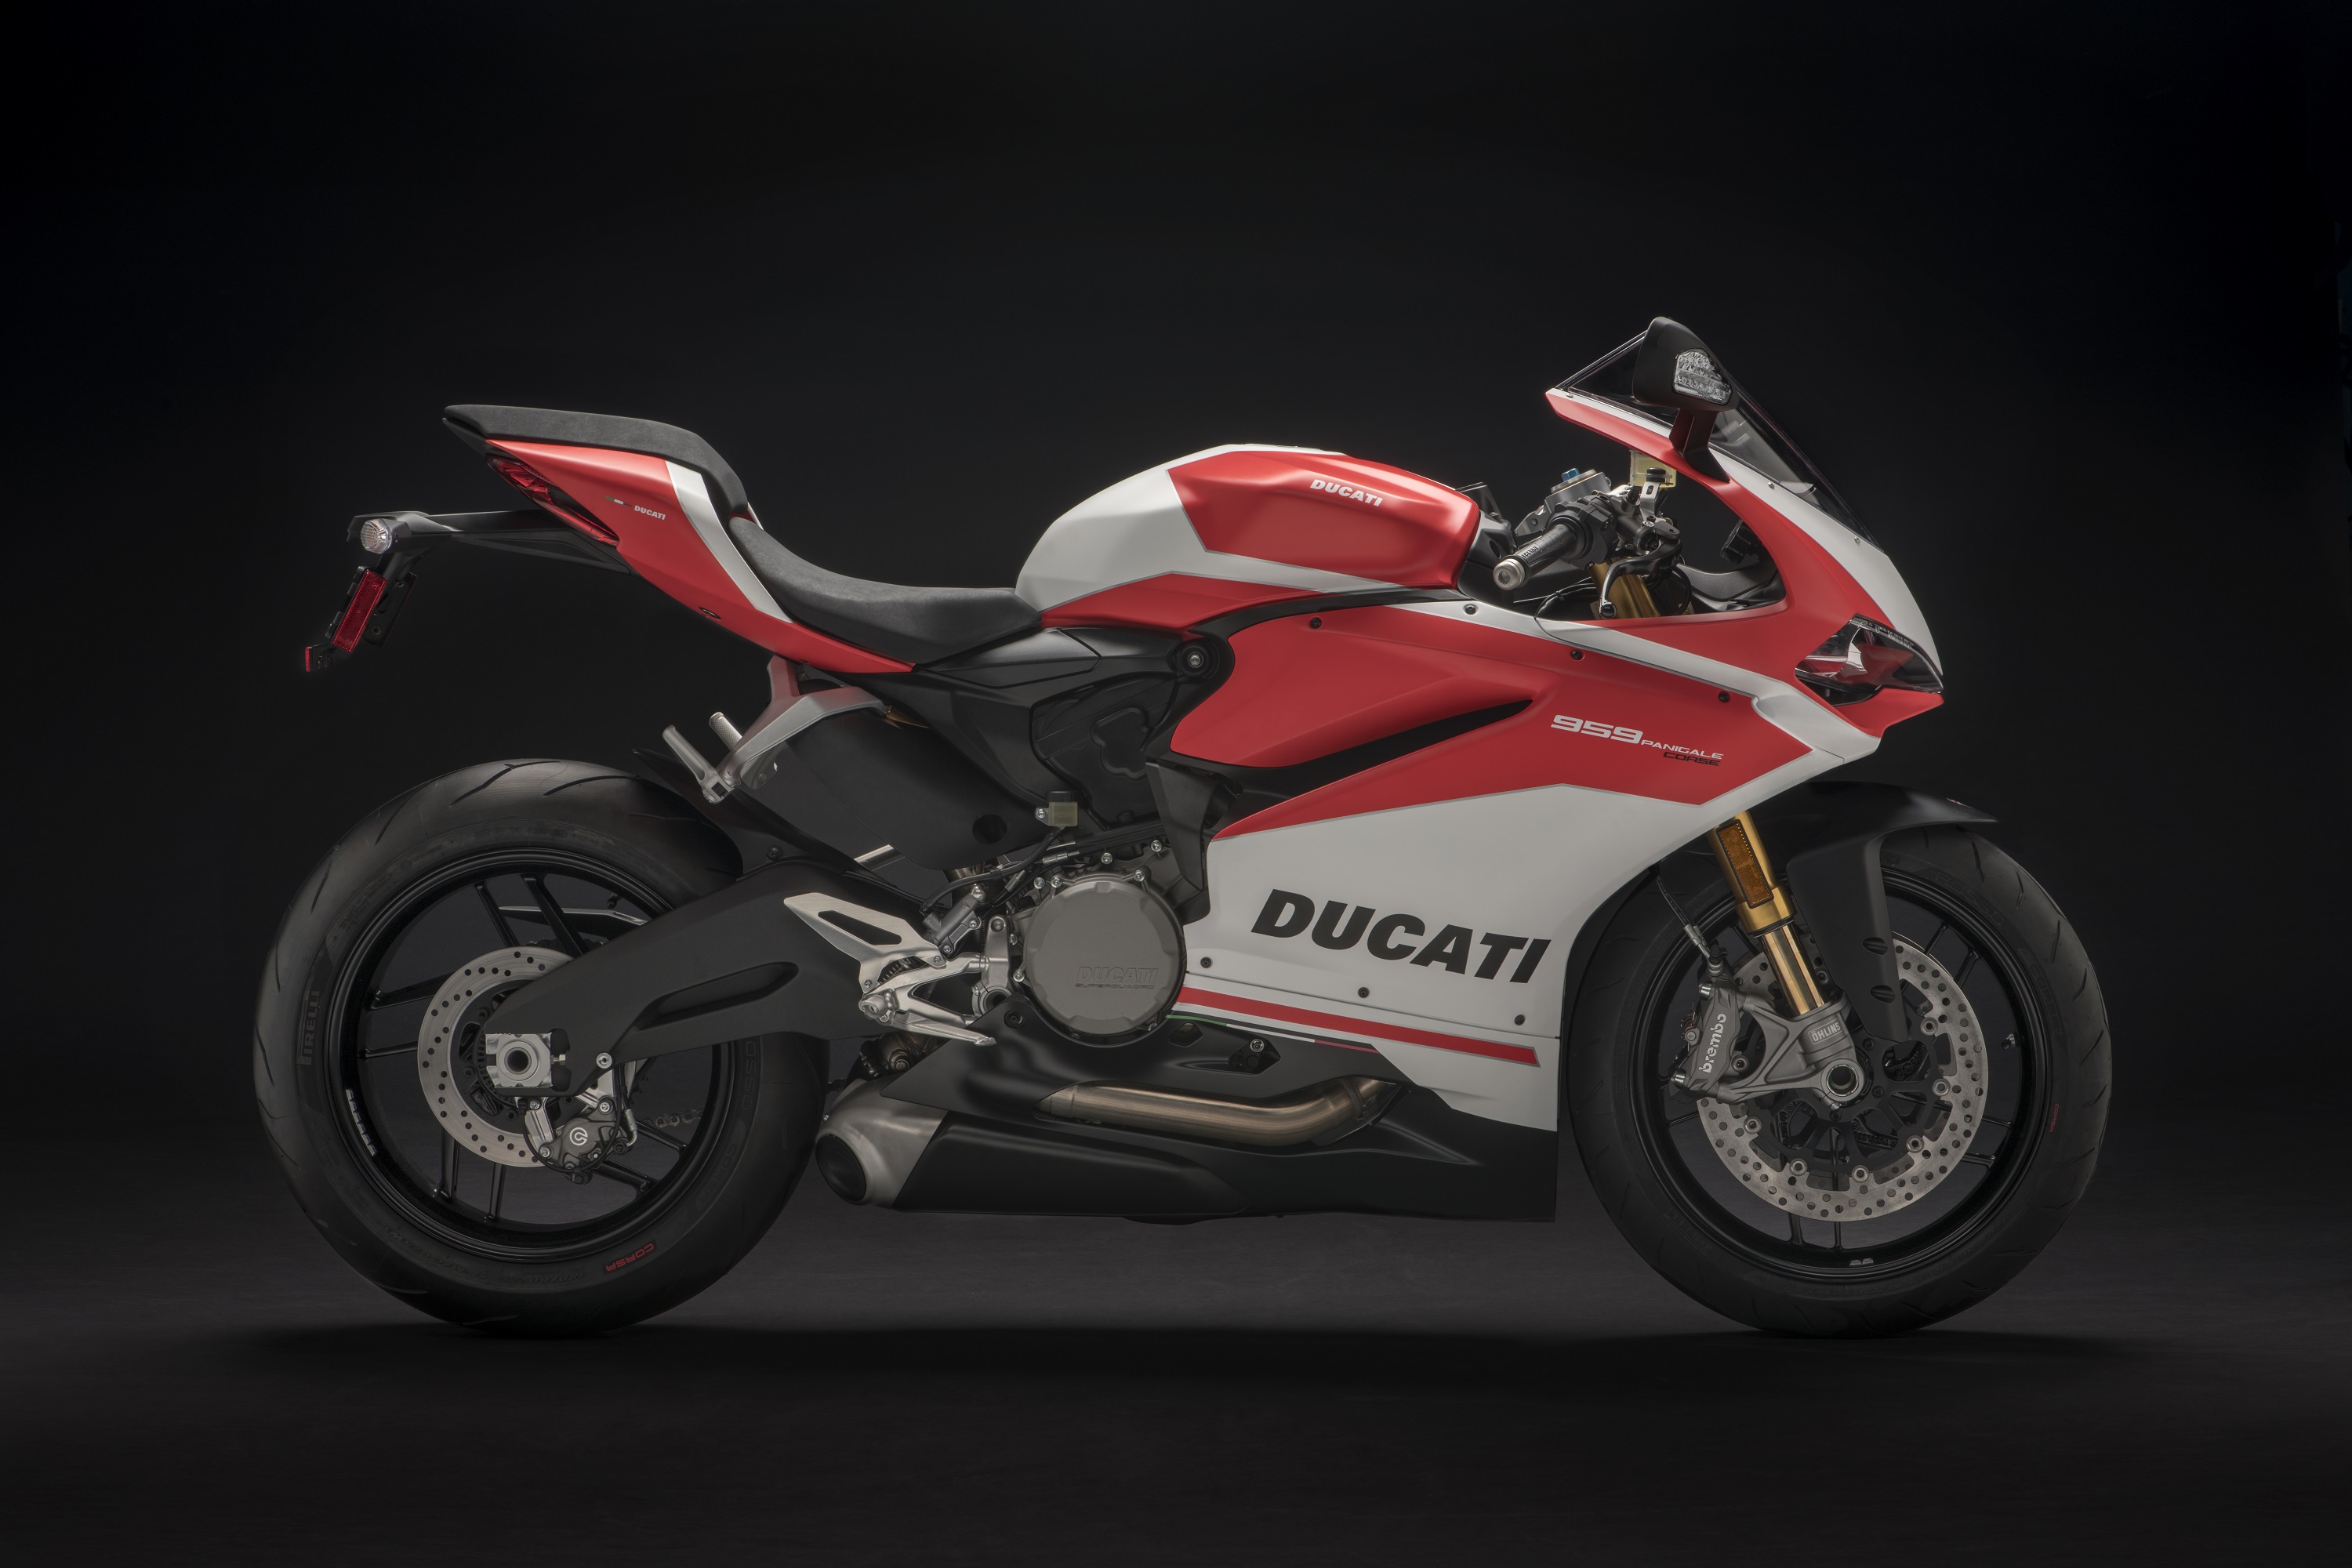 2018 Ducati Panigale 959 Corse Pictures, Photos, Wallpapers - Ducati 959 Corse 2018 , HD Wallpaper & Backgrounds